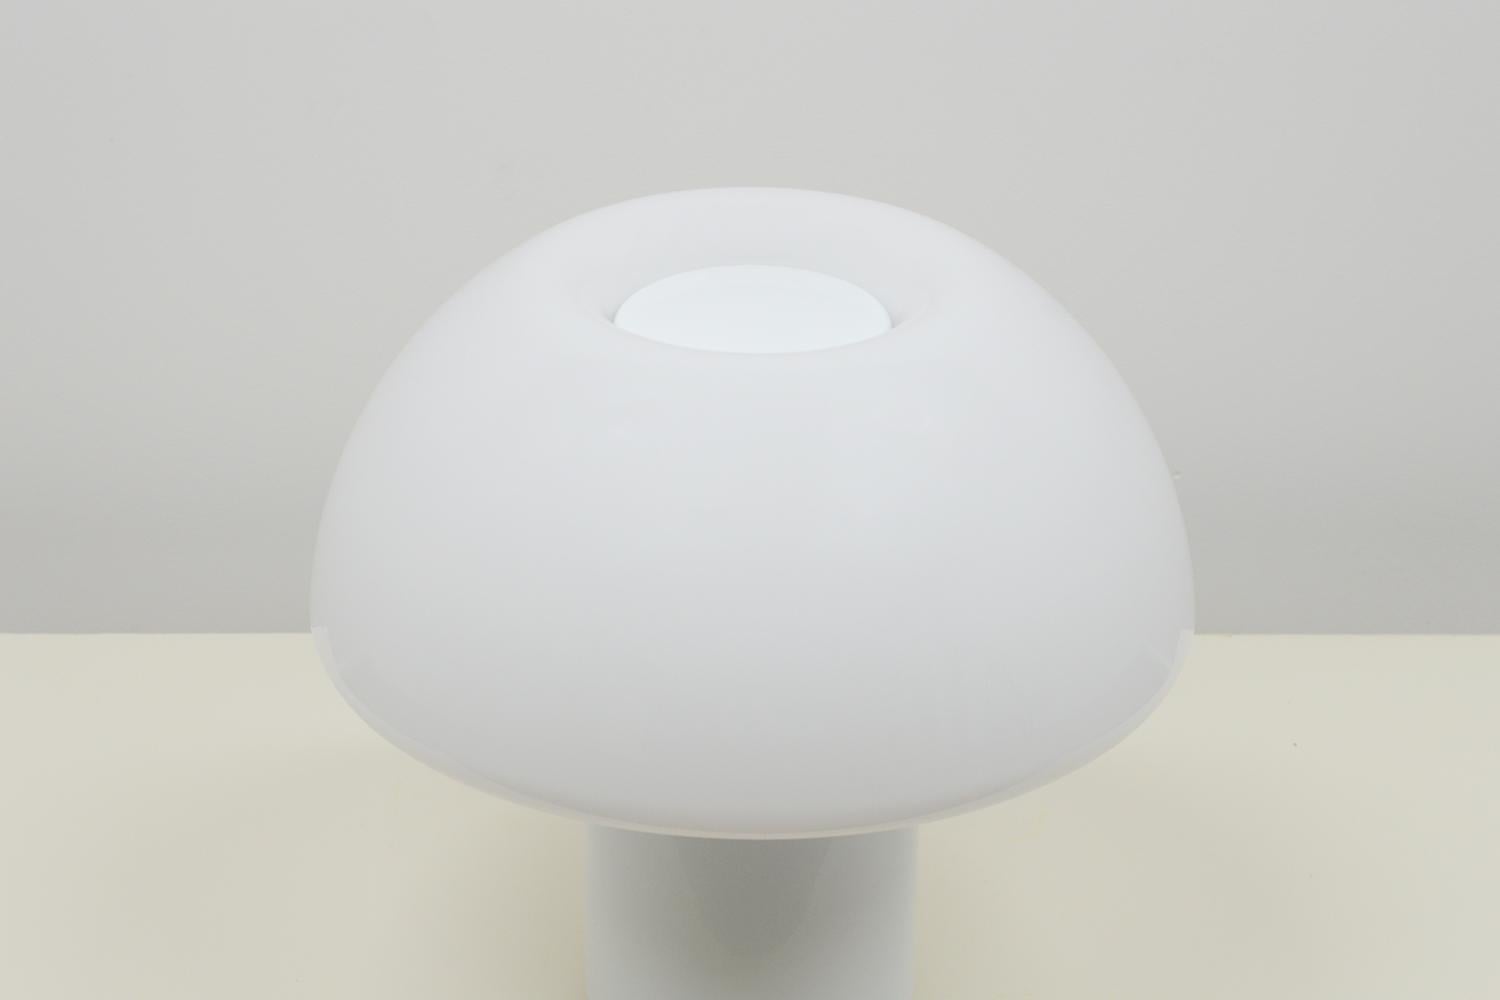 Italian “Mushroom” Table Lamp 625 by Elio Martilelli for Martinelli Luce, Italy 70s